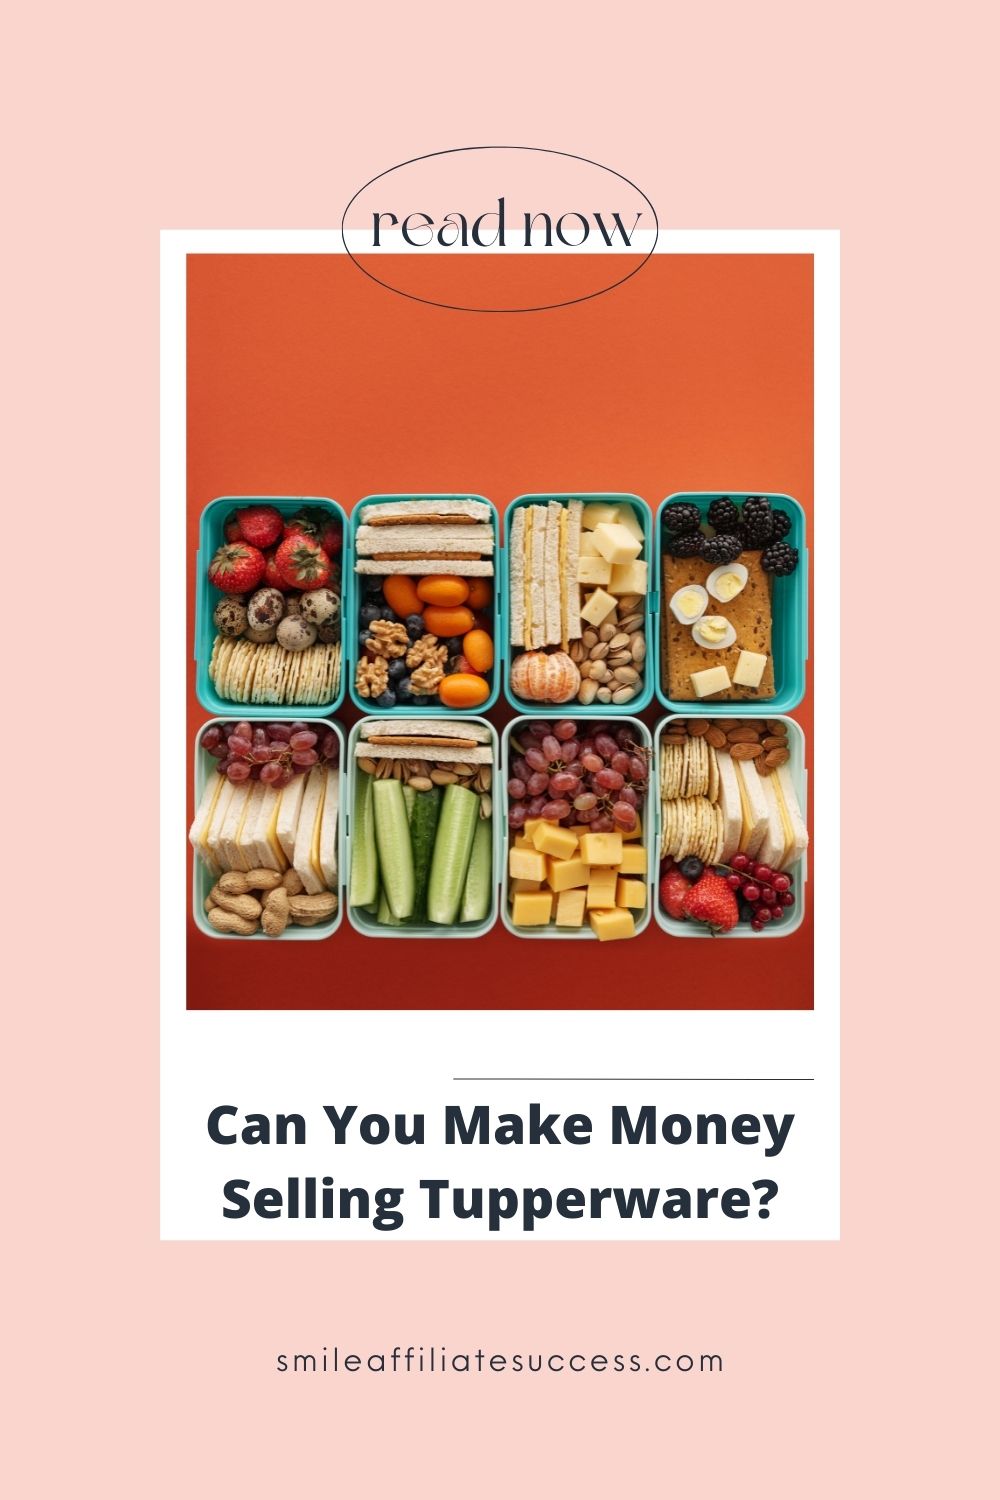 Can You Make Money Selling Tupperware?